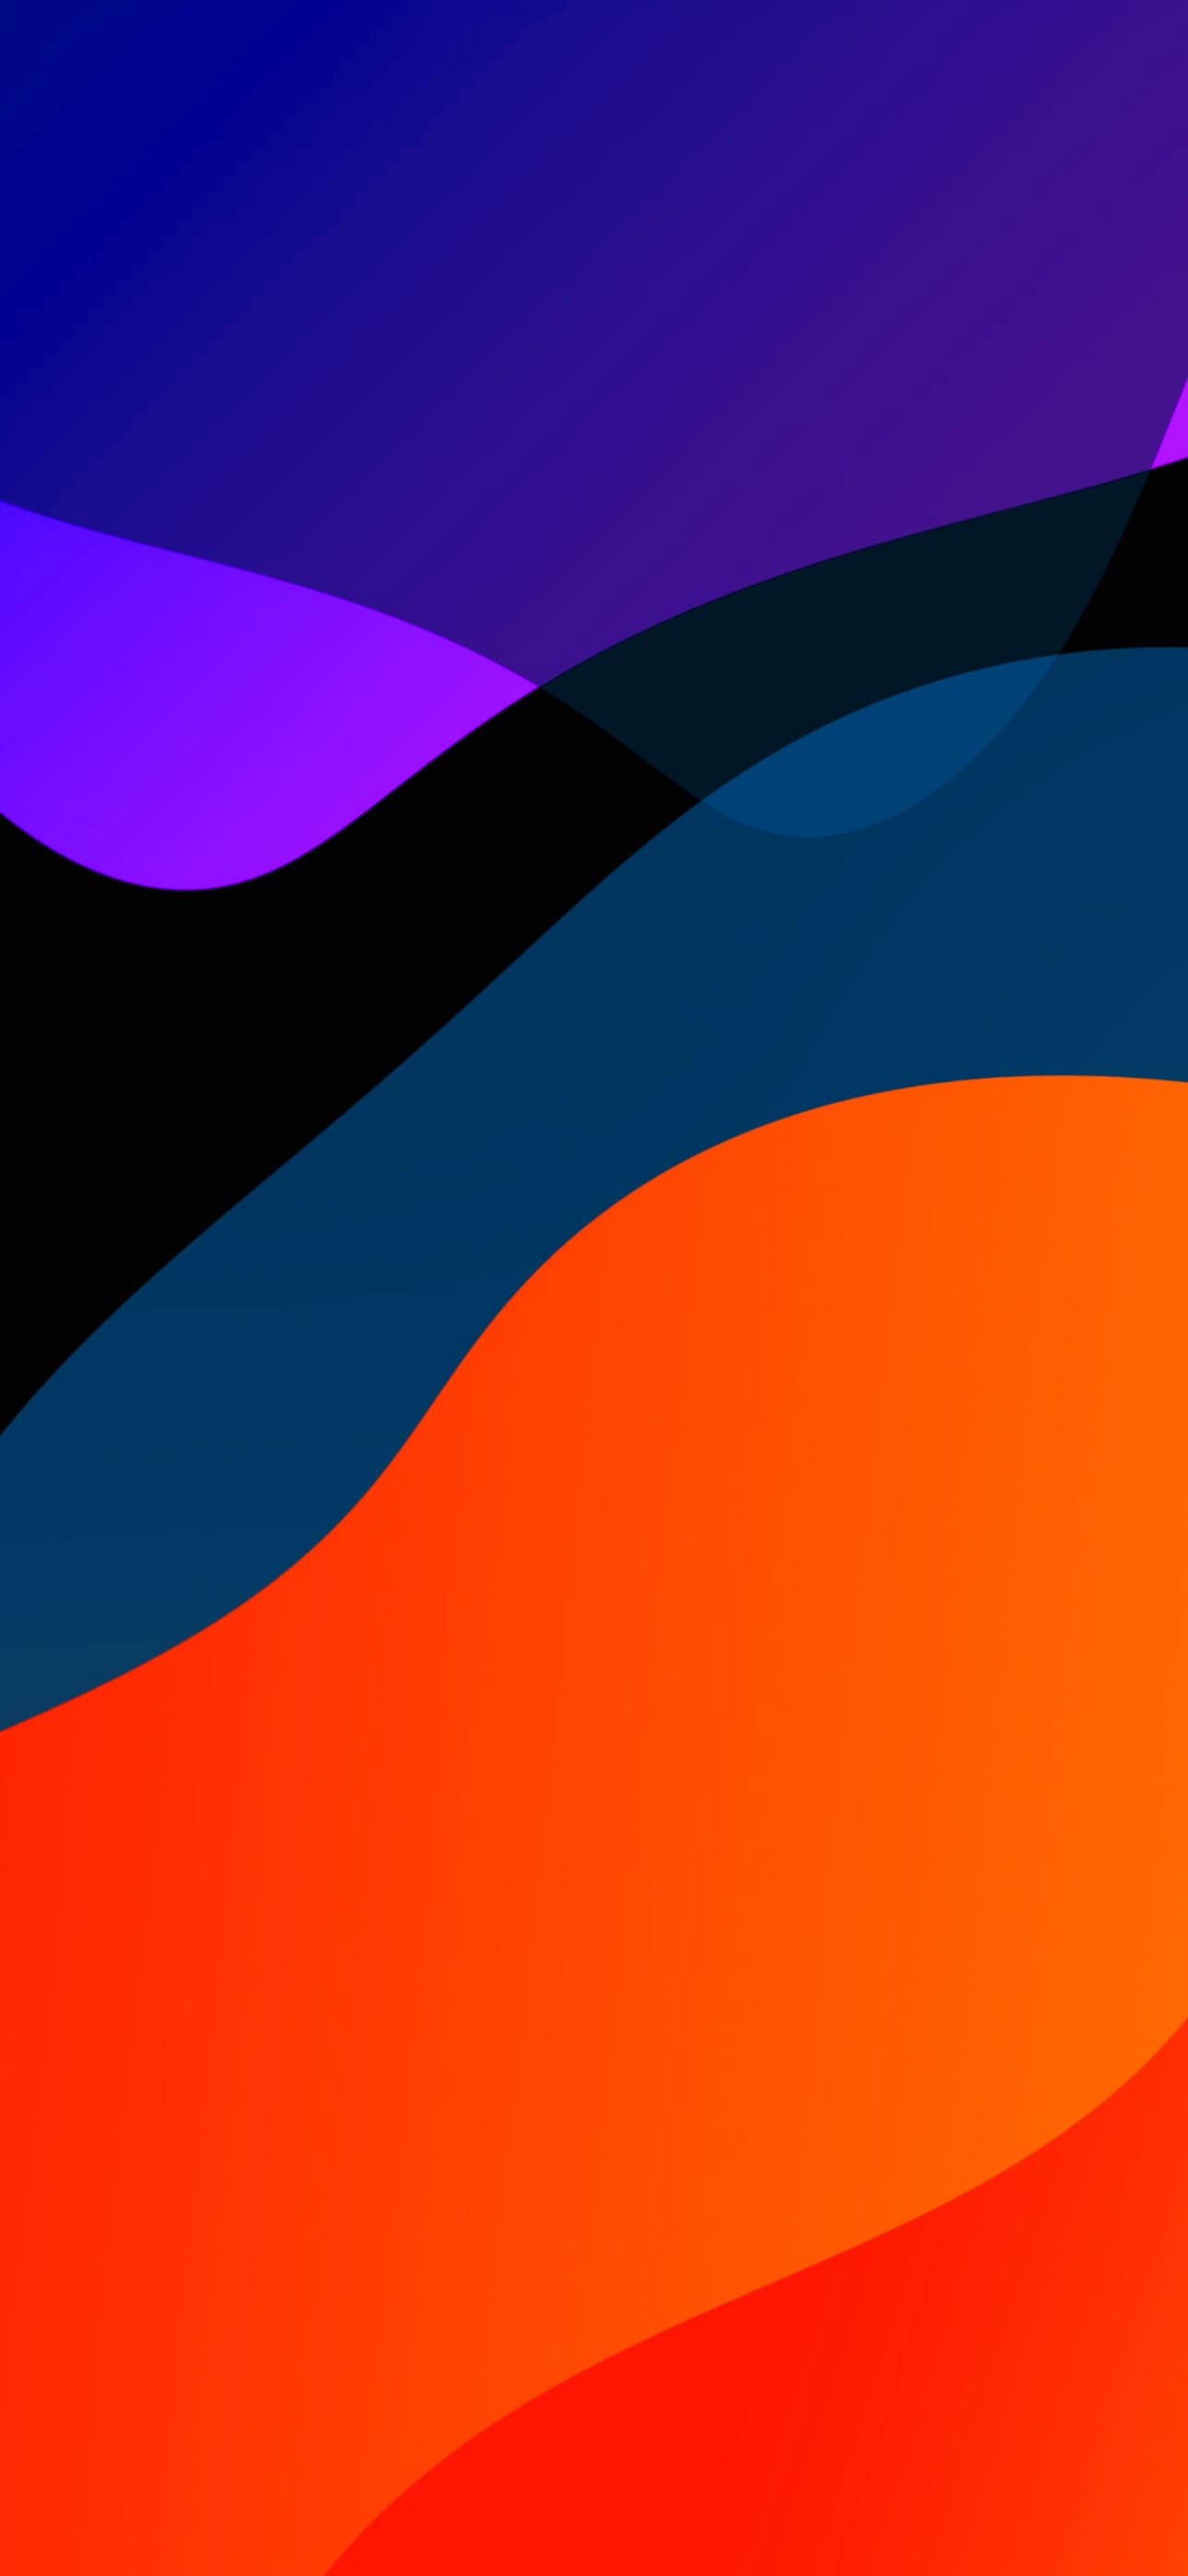 iPhone 15 Pro Max Wallpapers